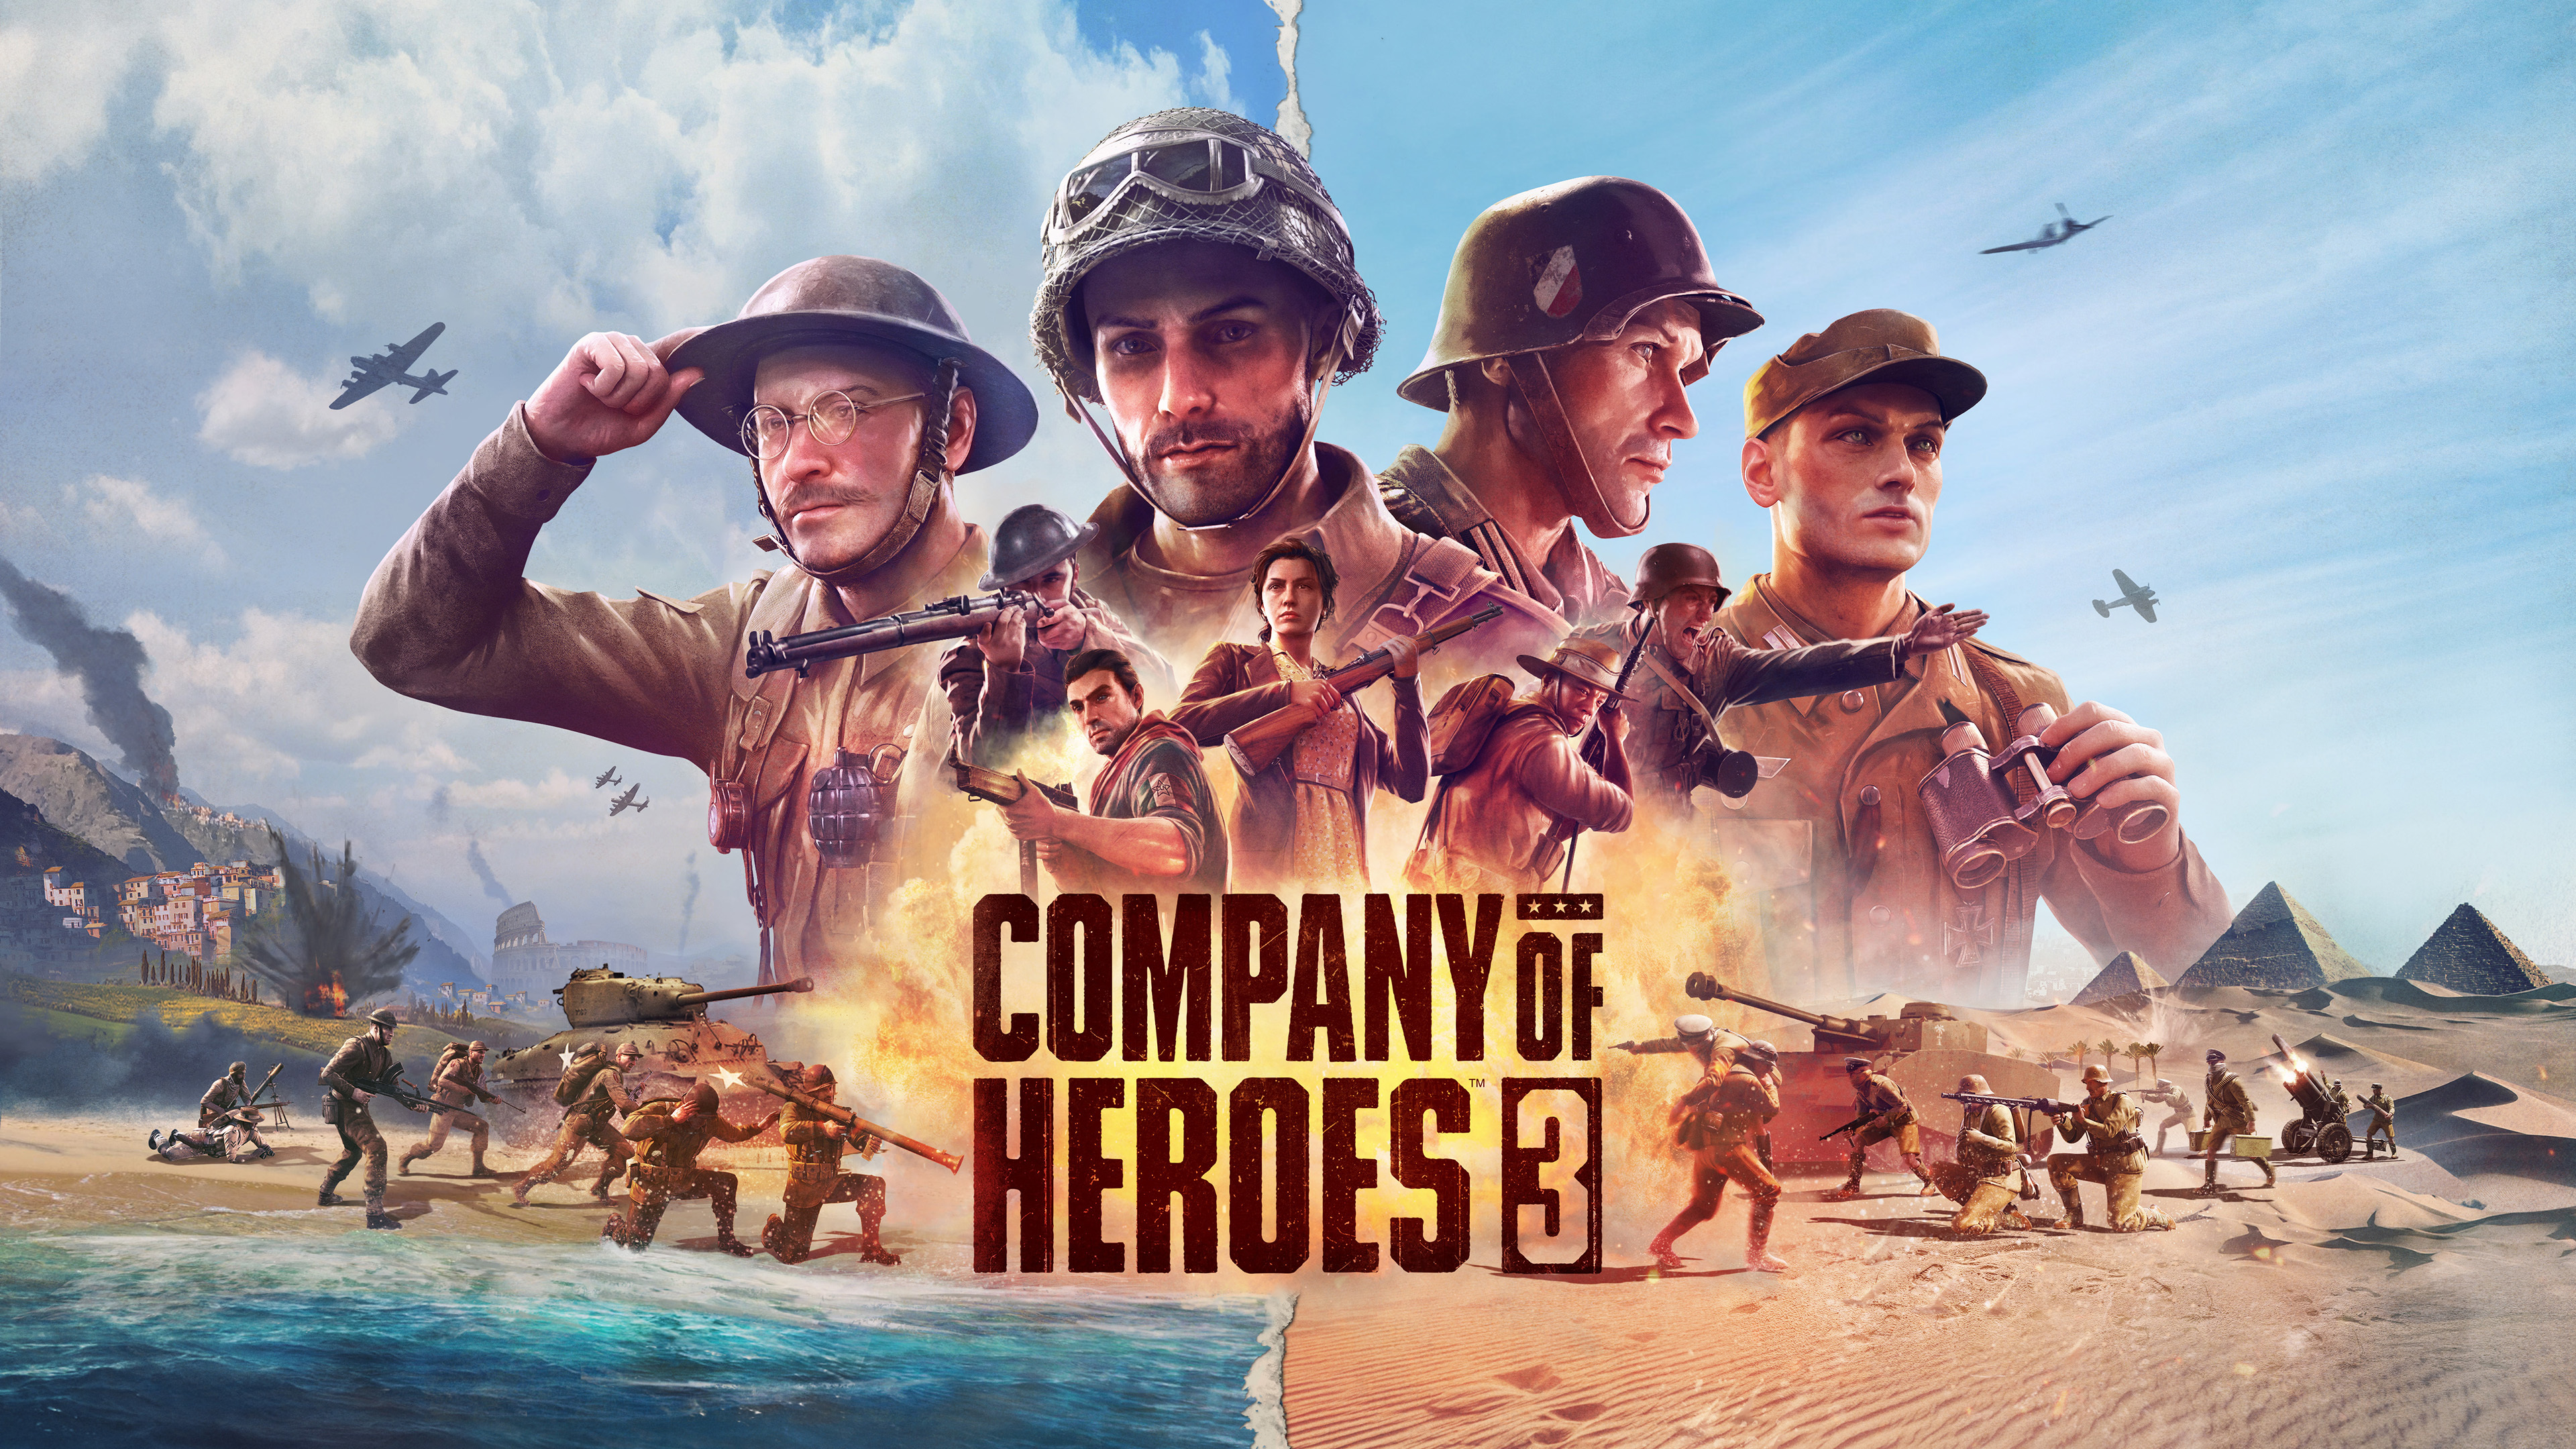 Company of Heroes 3 Wallpaper 4K, PC Games, 2022 Games, Games, #5968